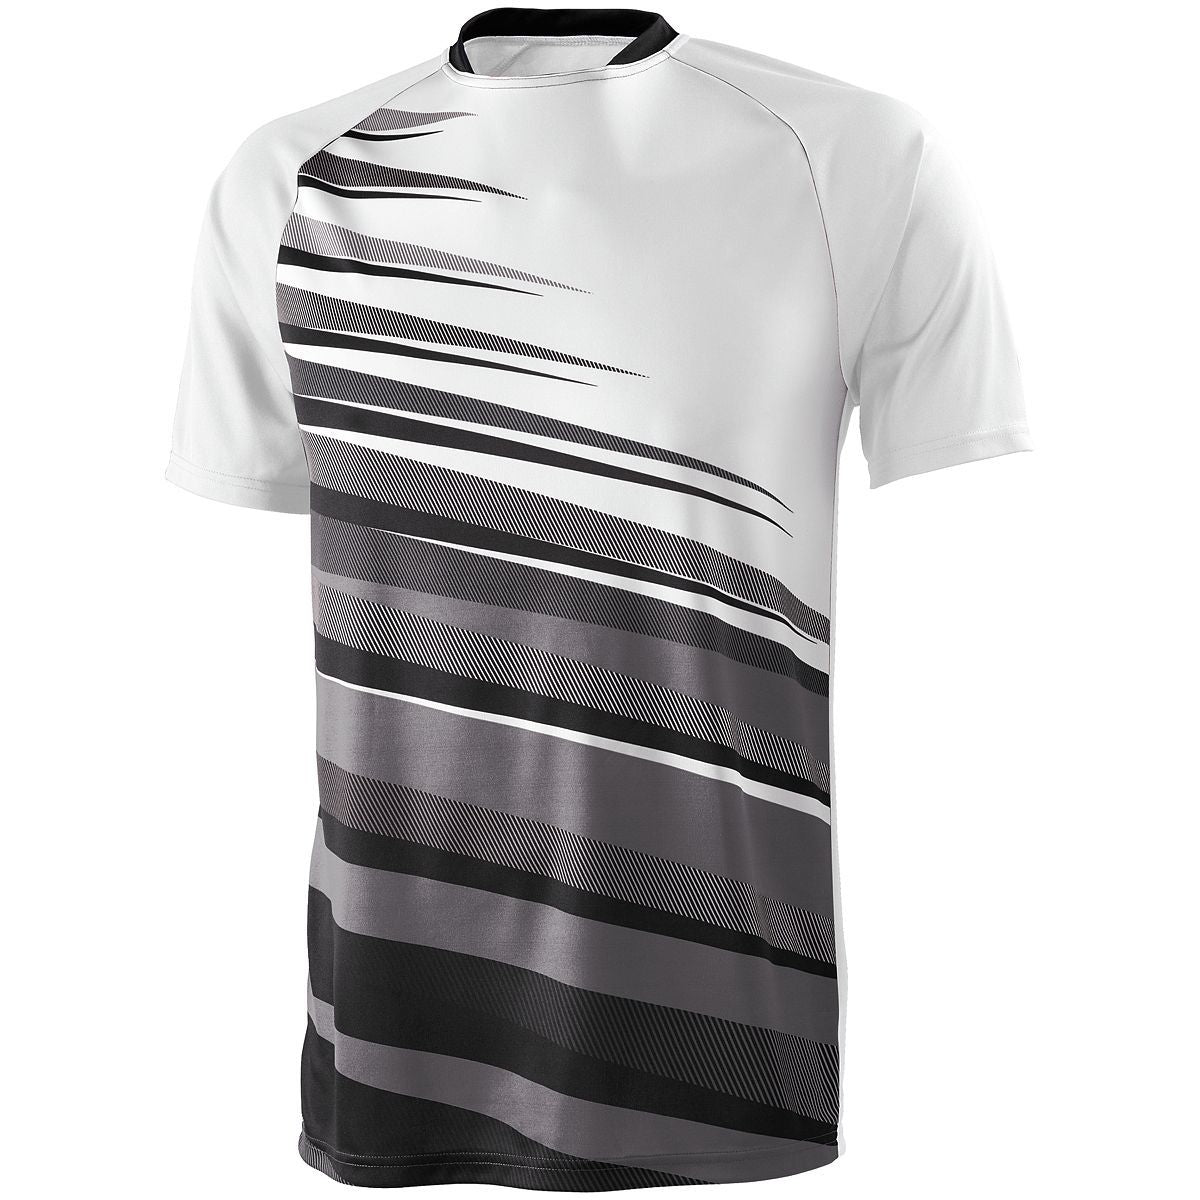 High 5 Adult Galactic Jersey in White/Black/Graphite  -Part of the Adult, Adult-Jersey, High5-Products, Soccer, Shirts, All-Sports-1 product lines at KanaleyCreations.com